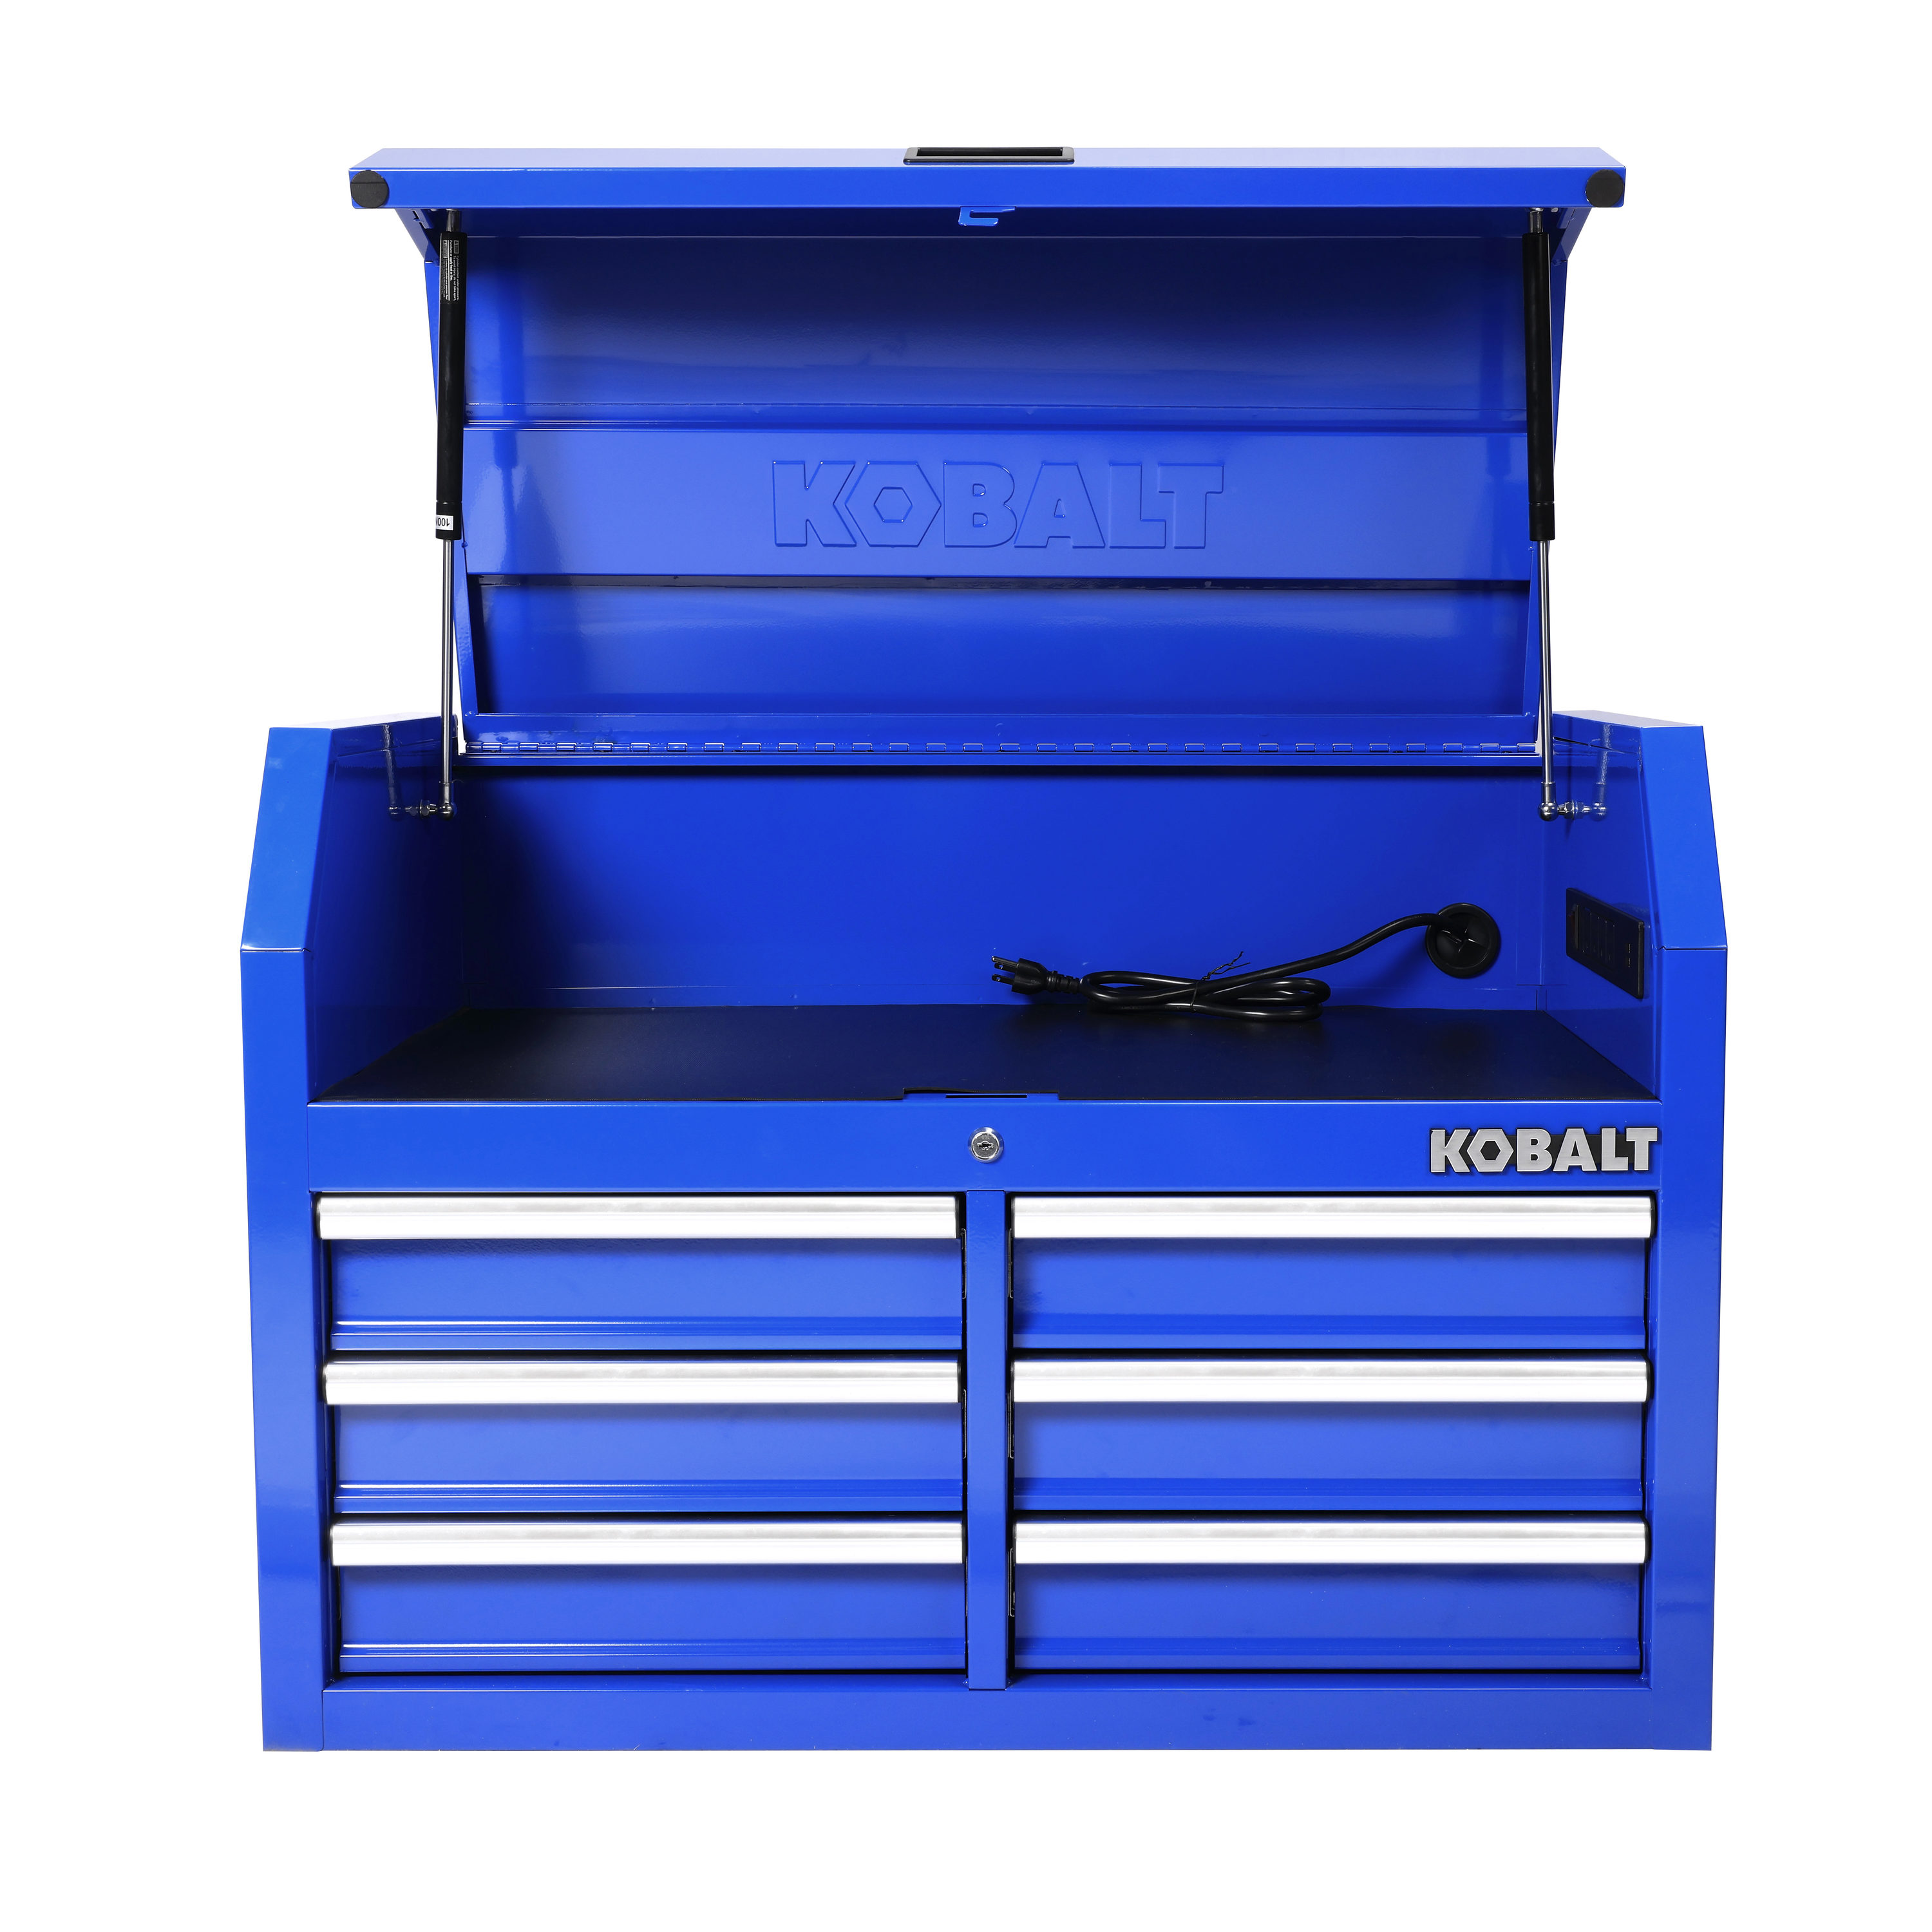 Kobalt 35.6in W x 24.8in H 6Drawer Steel Tool Chest (Blue) at